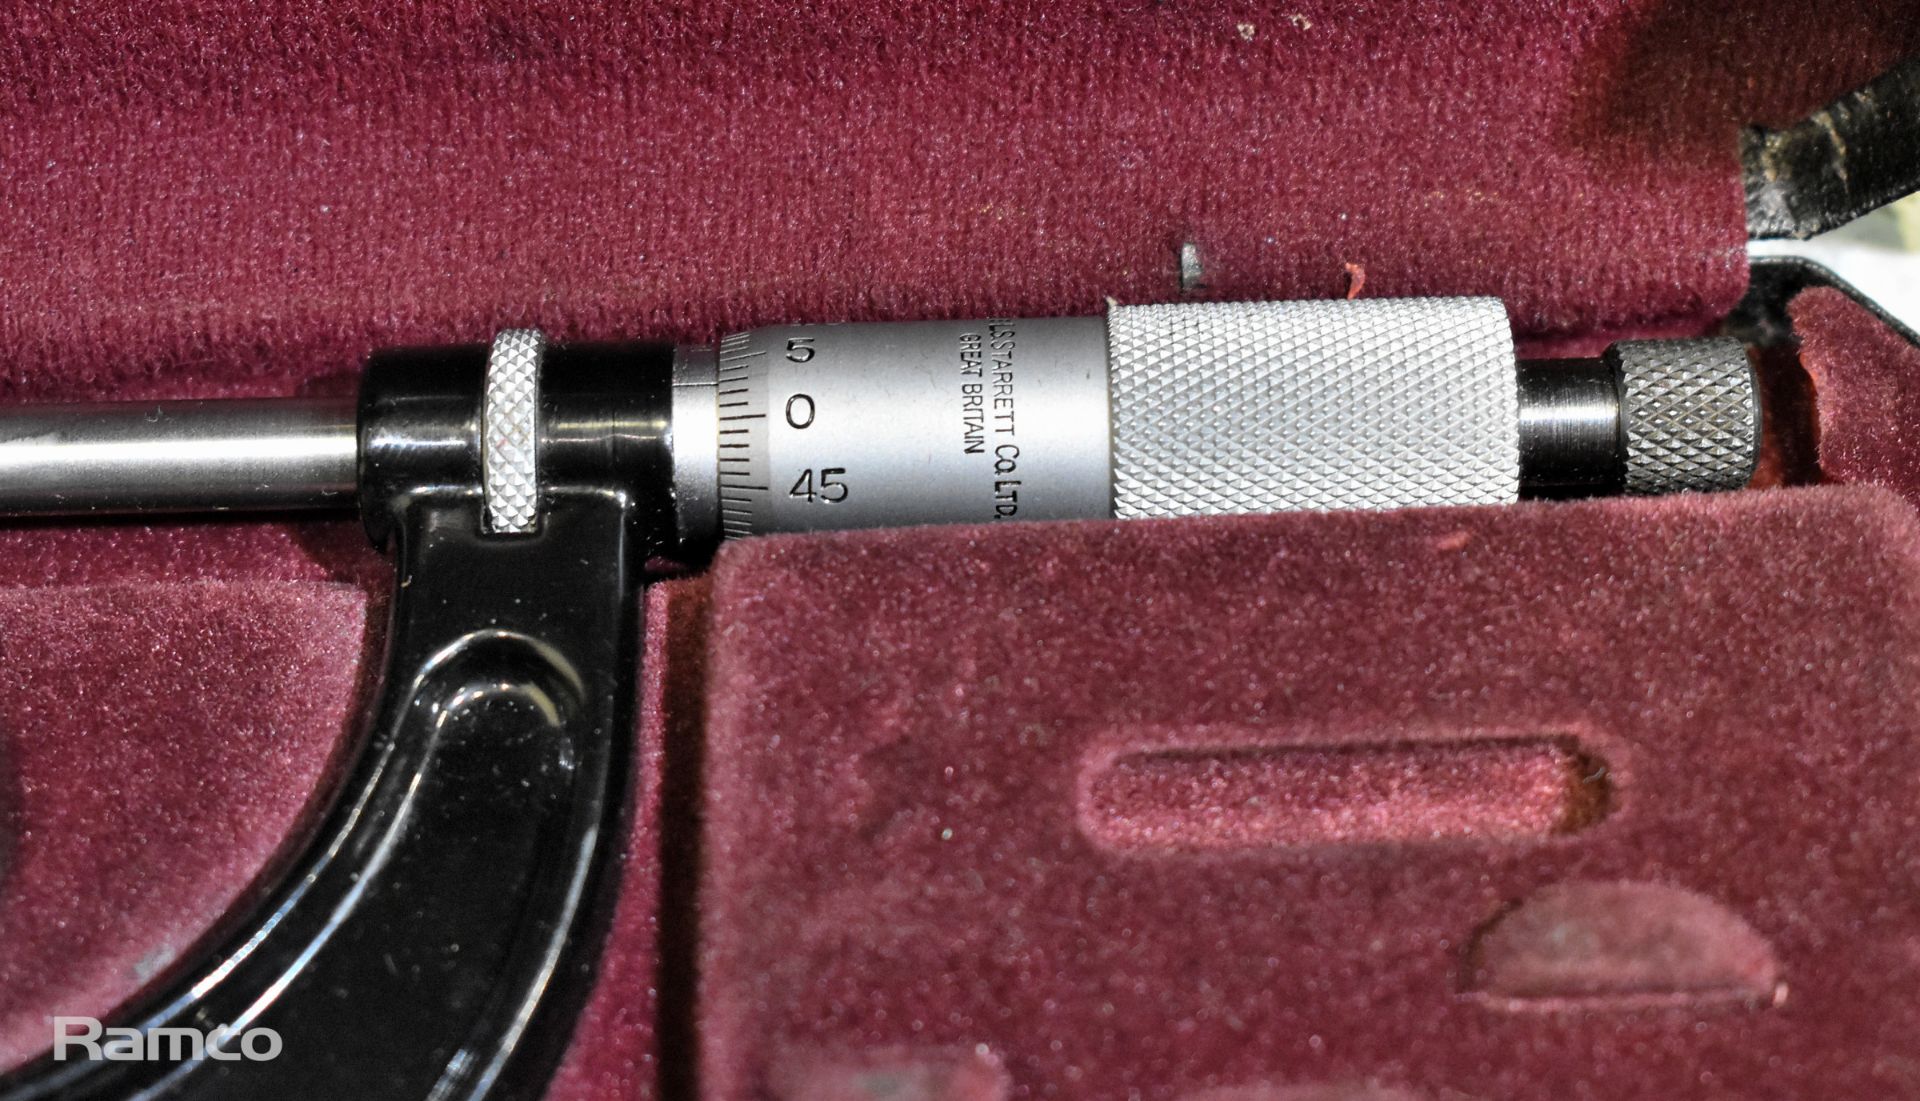 2x Starrett No 436 25-50mm micrometer calipers with case (incomplete) - Image 3 of 6